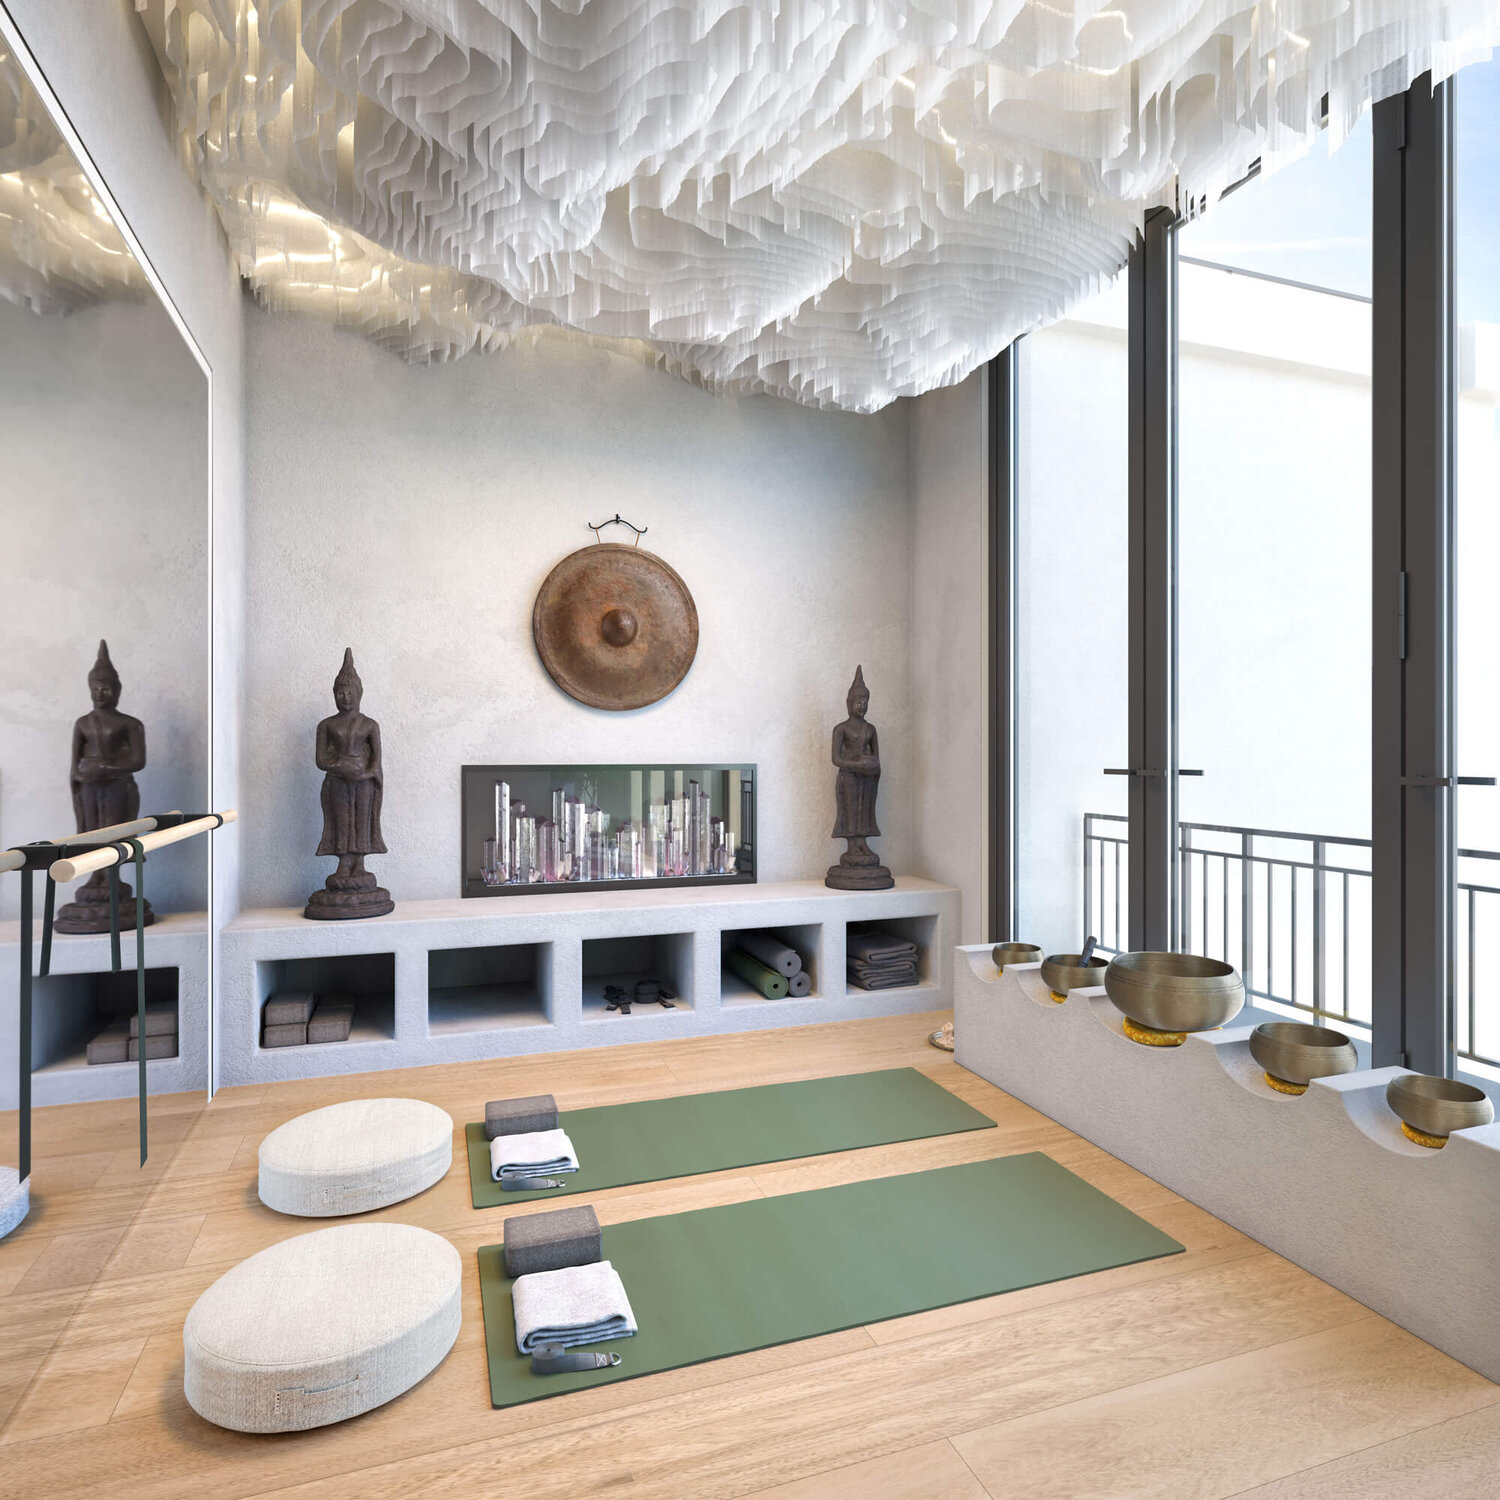 View of yoga room.